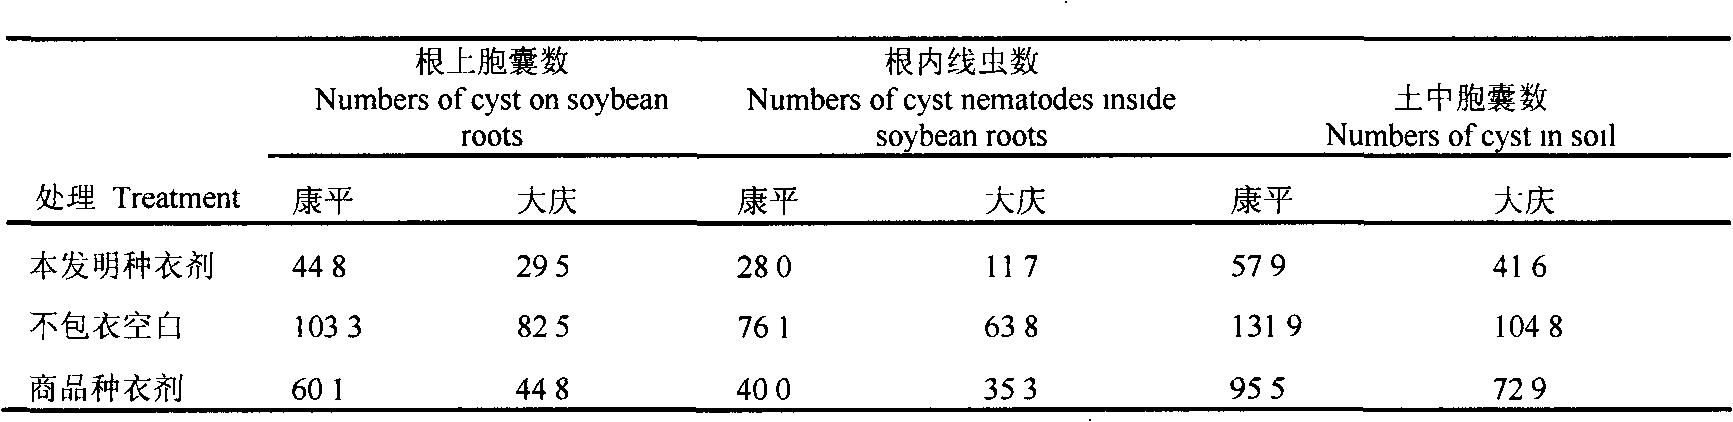 Biological seed coating for controlling soybean cyst nematodes